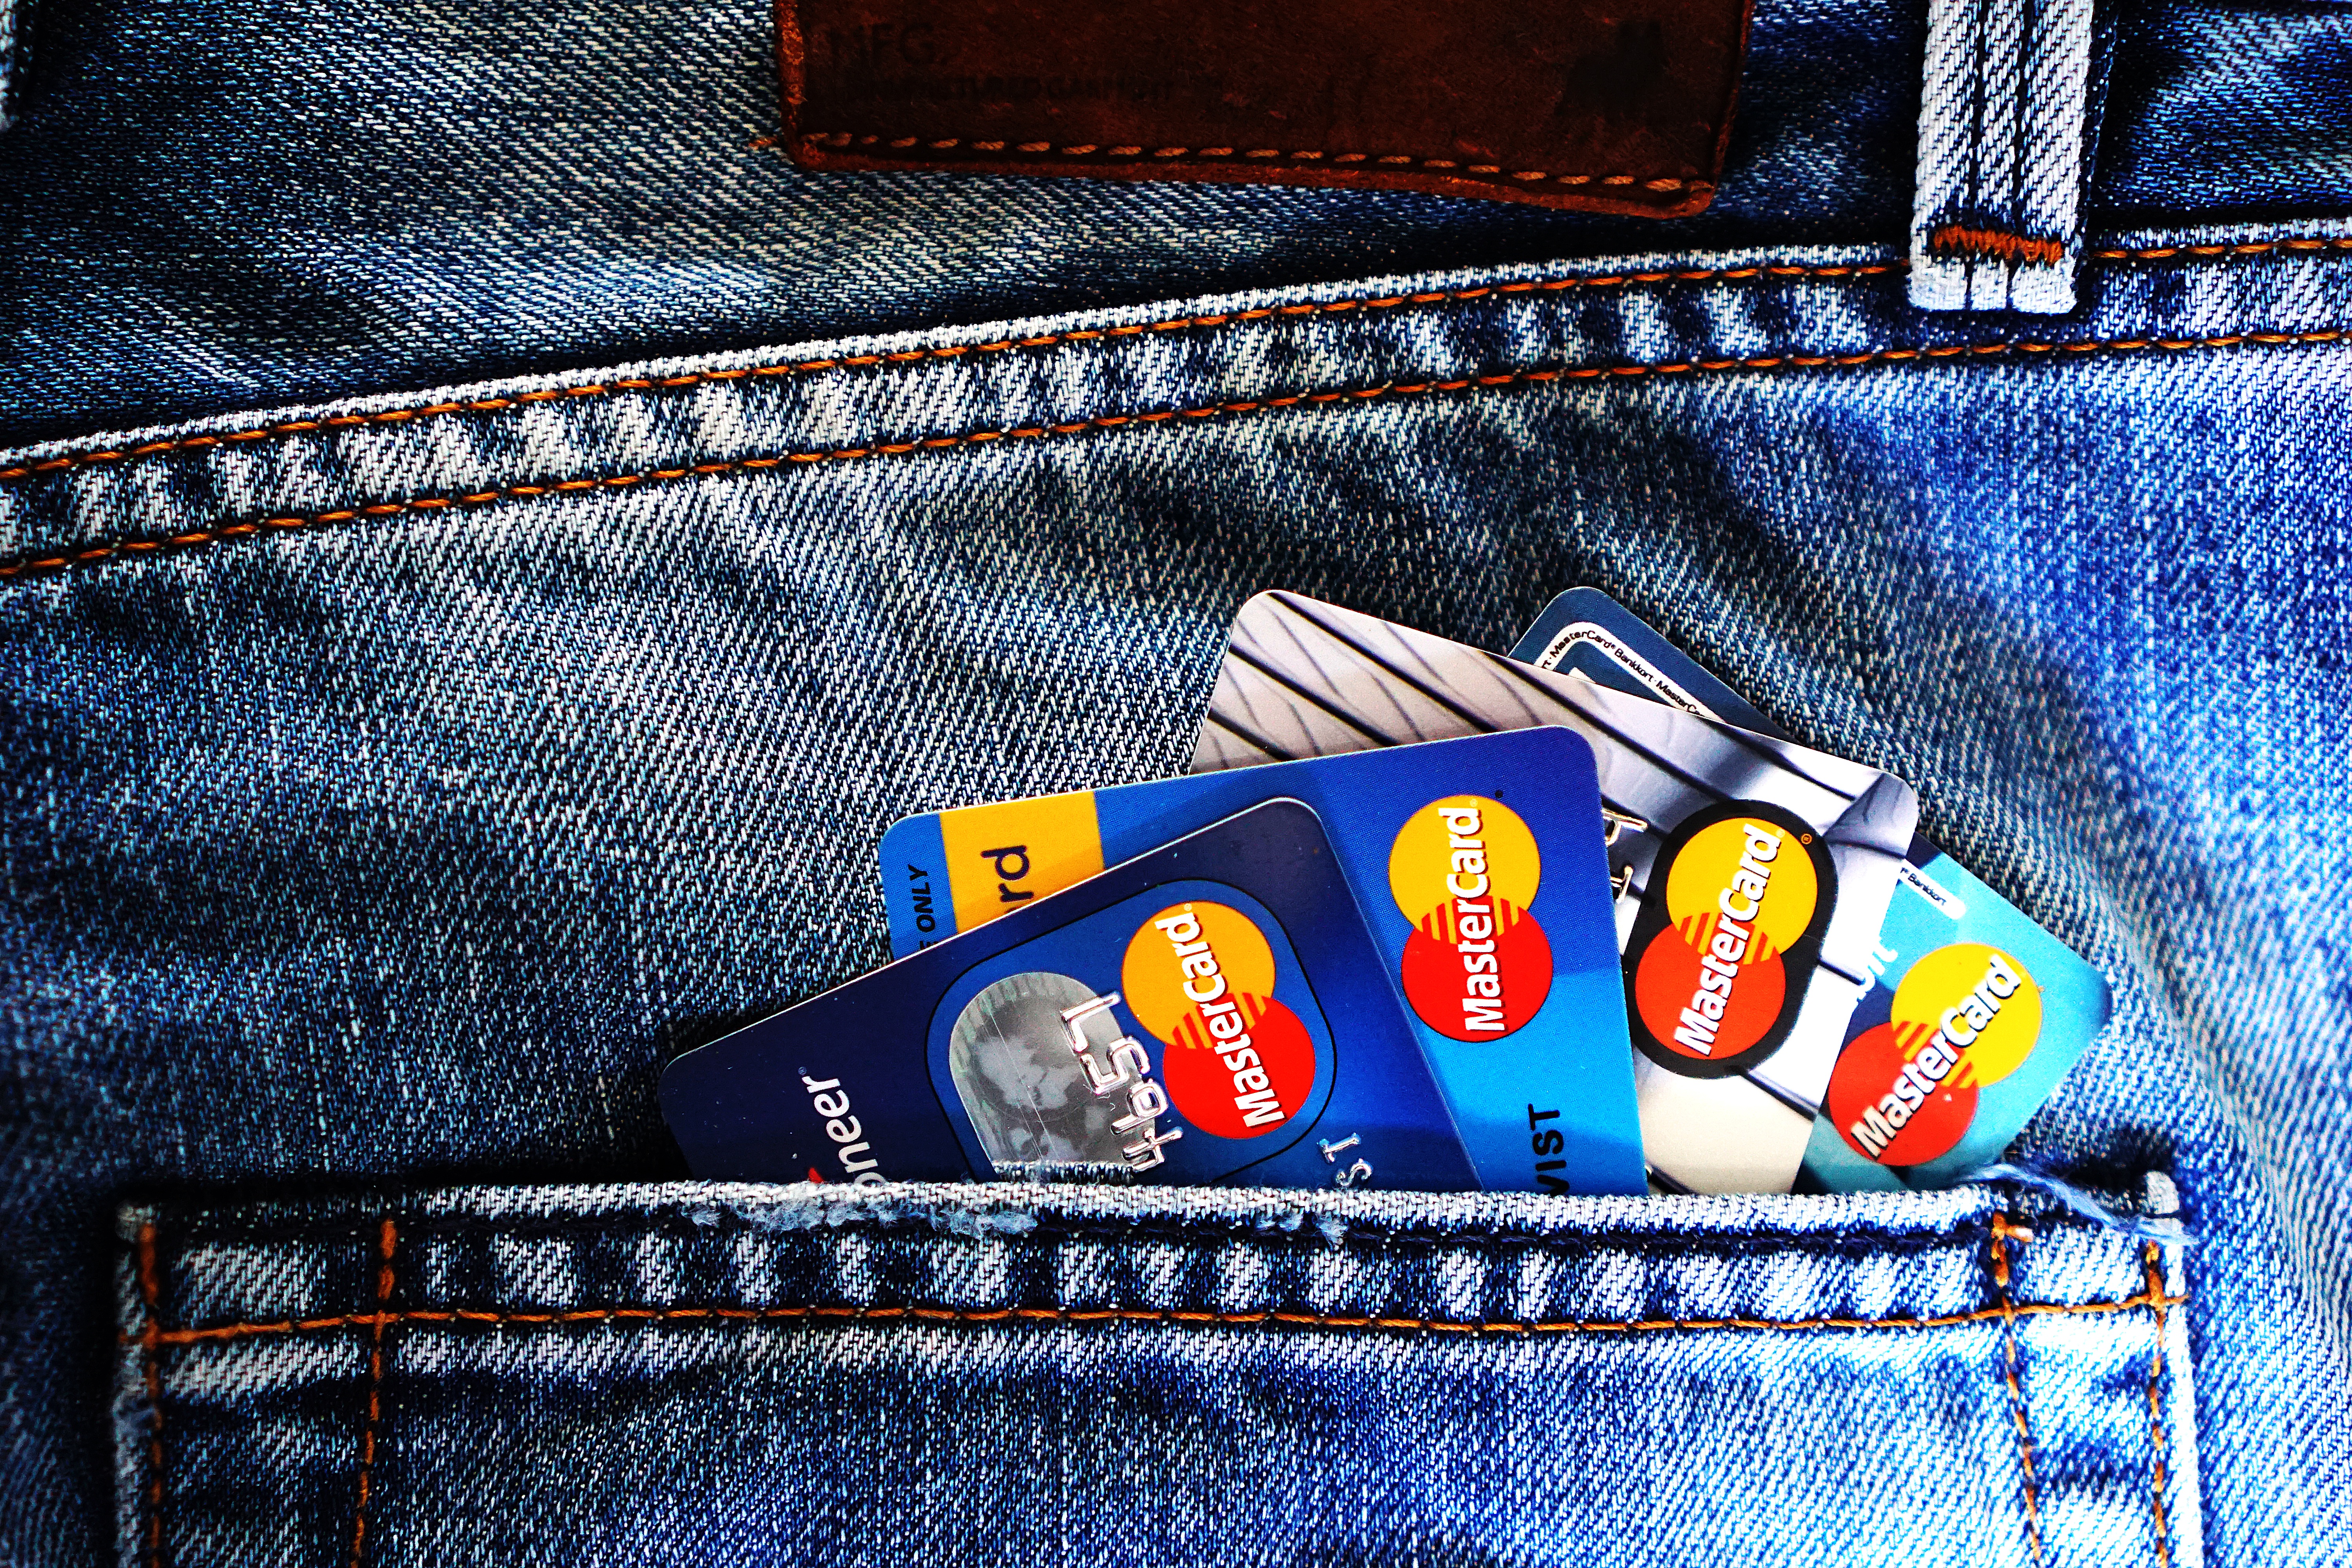 Bankruptcy image of Credit Cards in Jeans